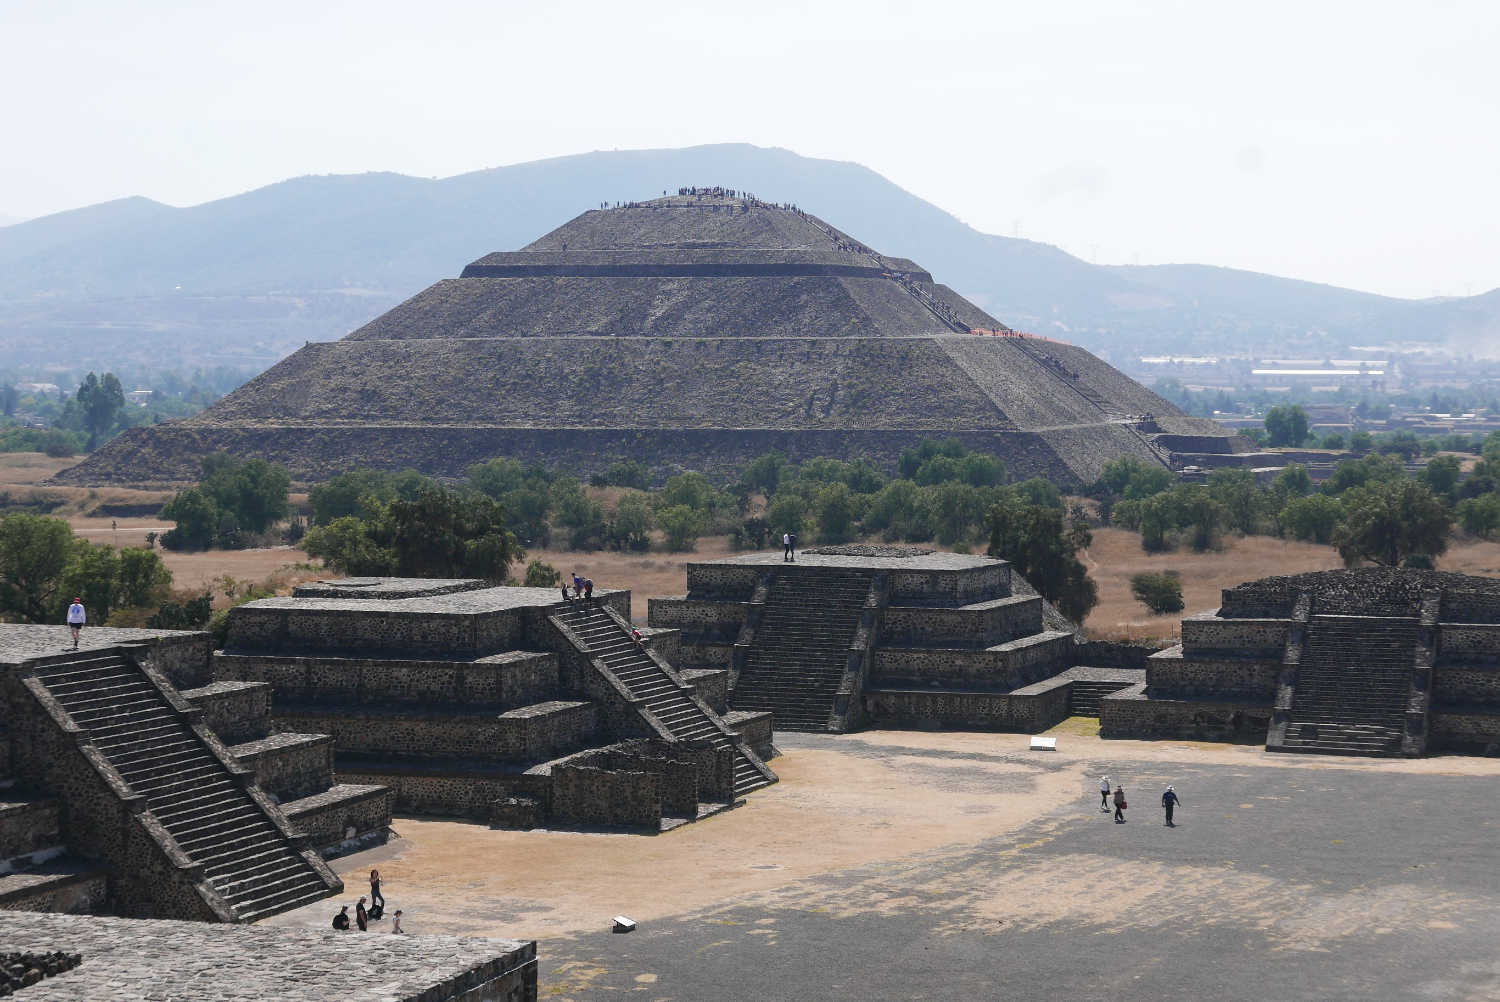 Panorama picture of Pyramid of the Sun in Teotihuacan